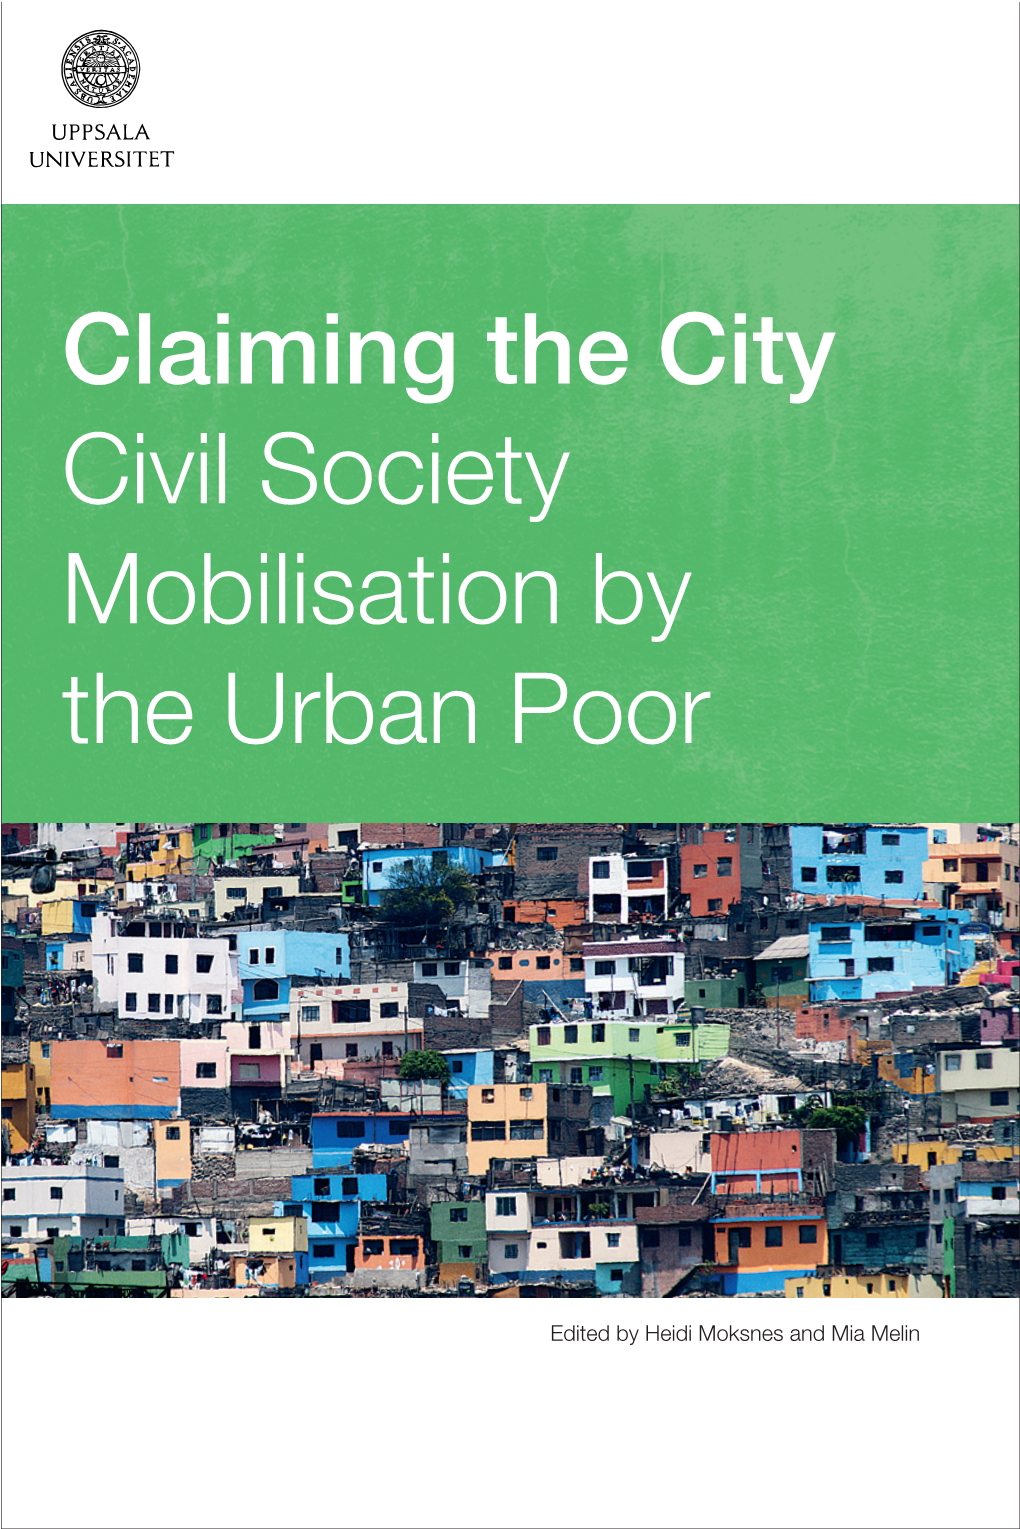 Claiming the City Civil Society Mobilisation by the Urban Poor